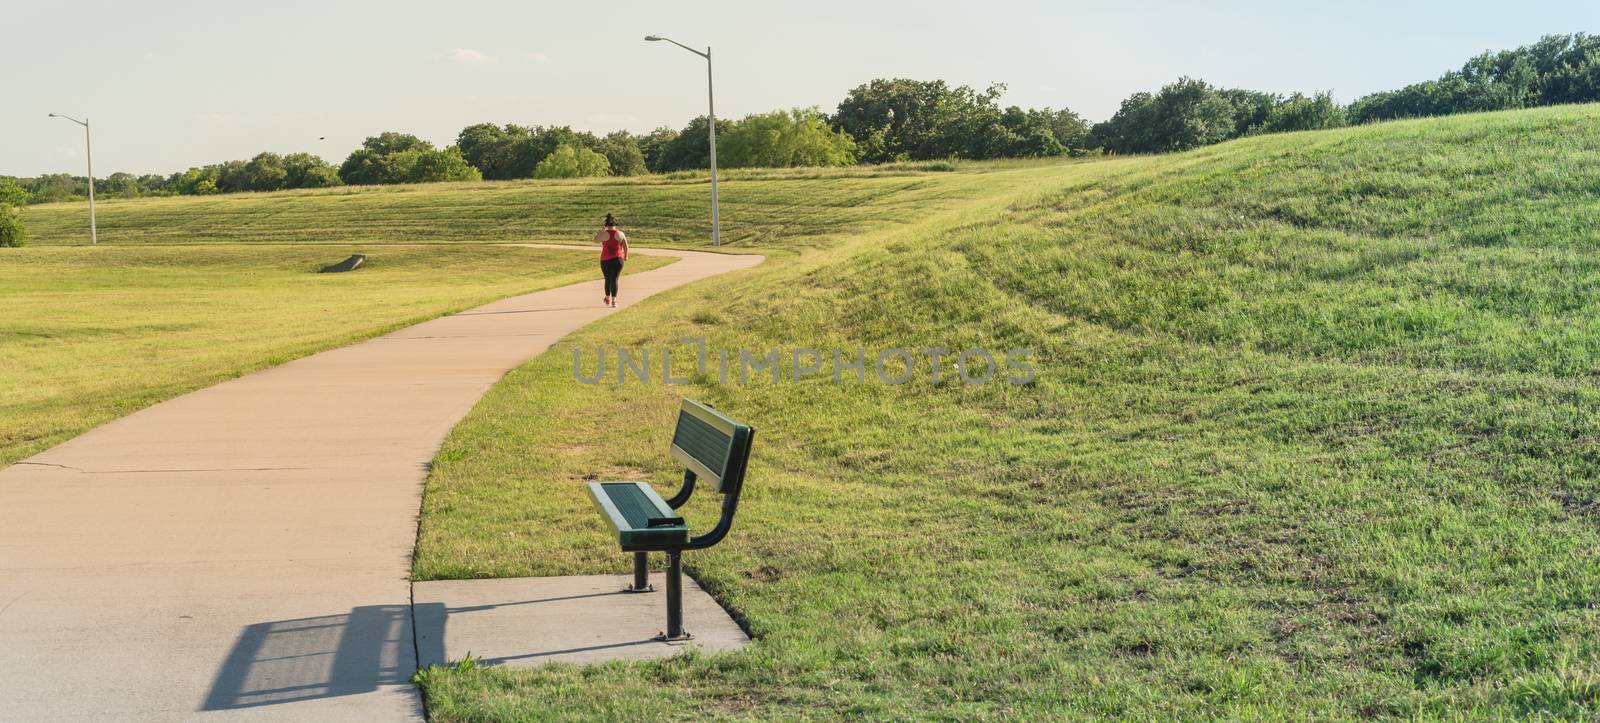 Curved pathway with bench in a hillside urban park near Dallas, Texas, America. Rearview of chubby lady jogging with headphone near lamppost.